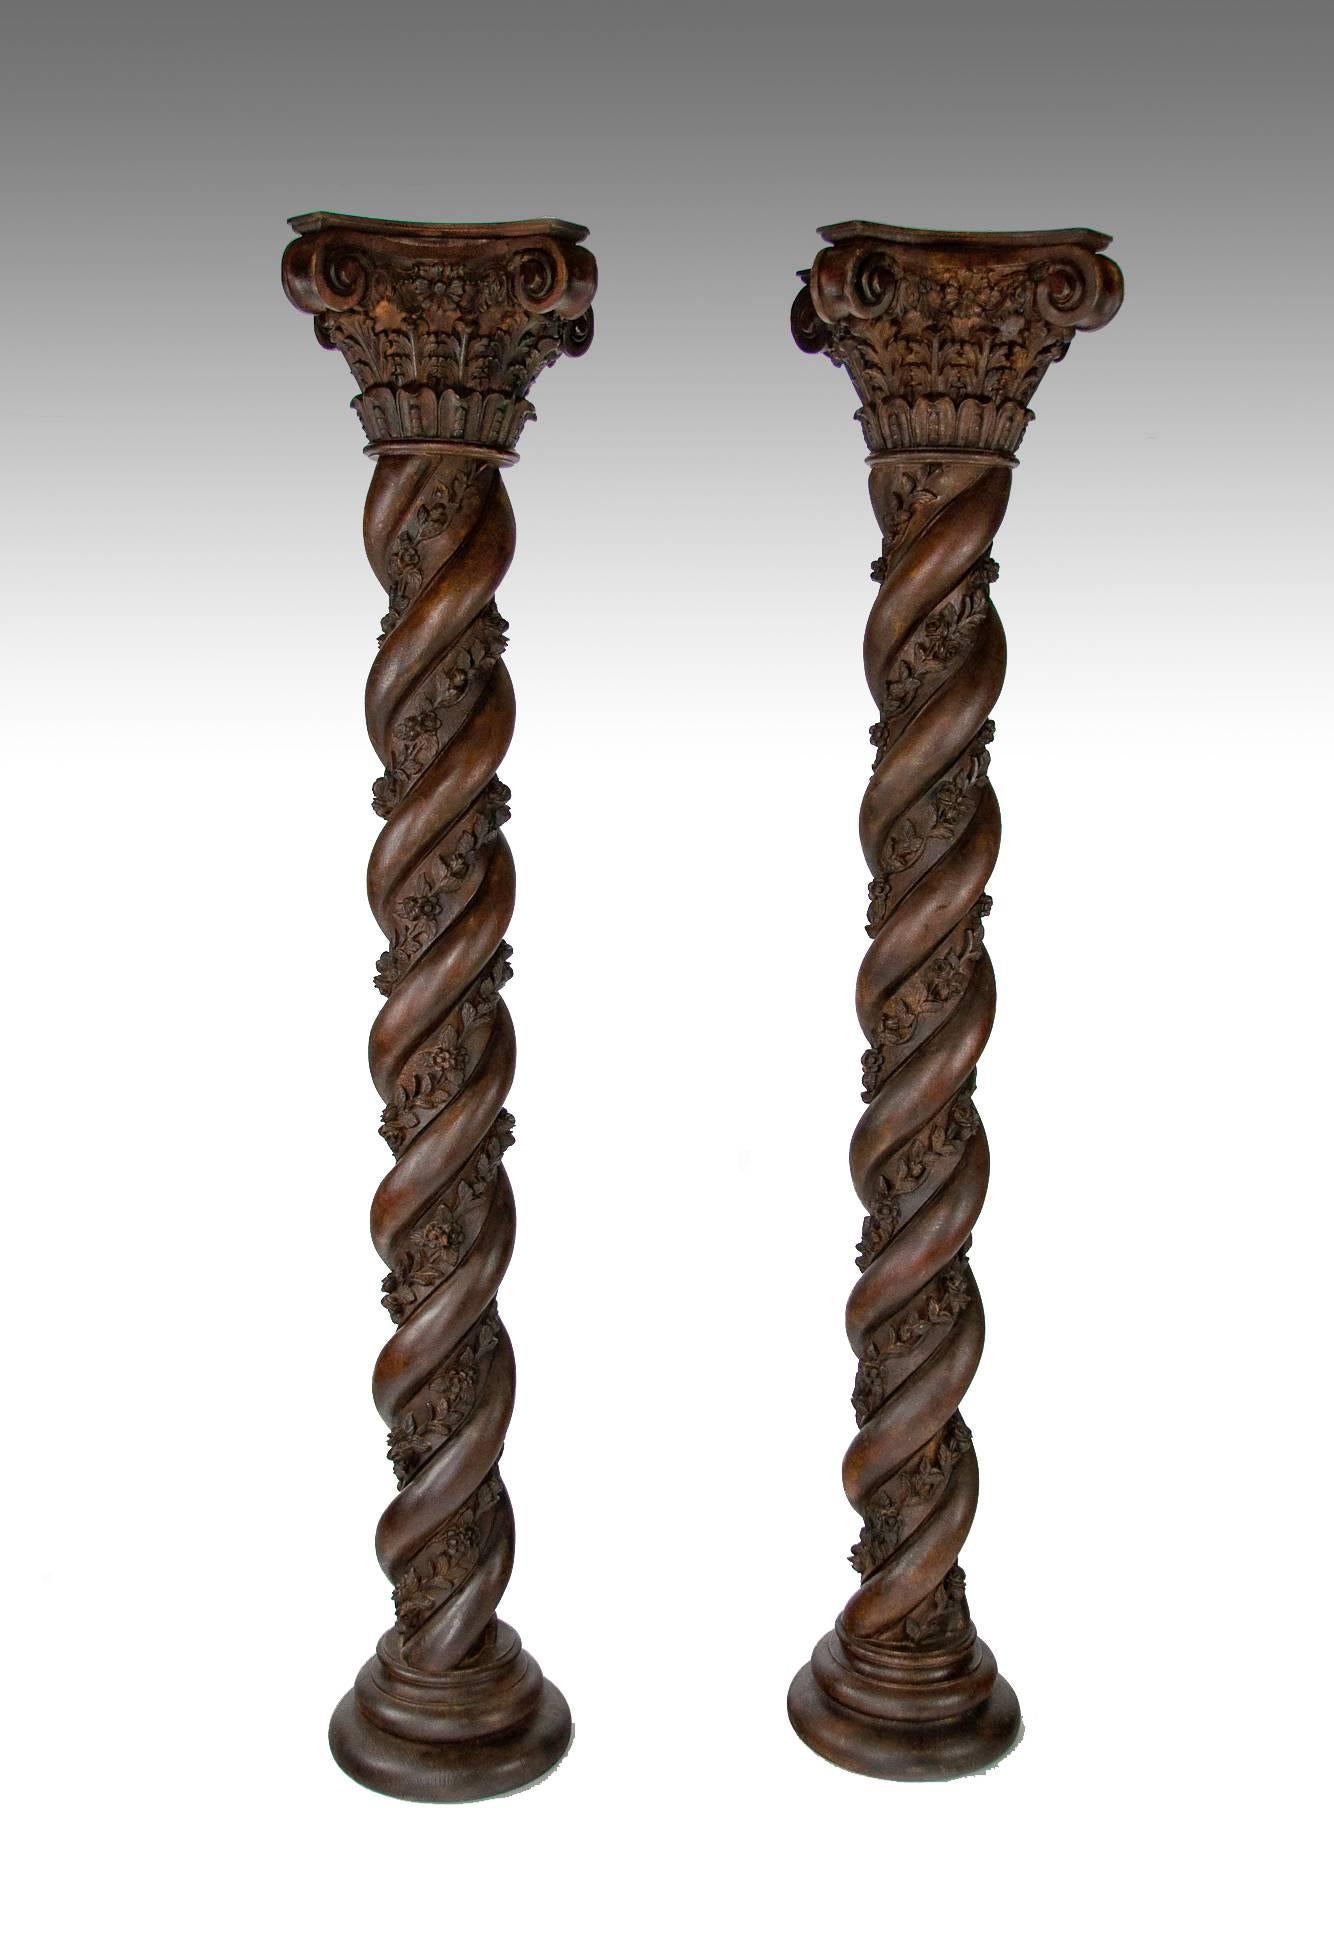 A magnificent pair of 7ft Victorian twisted carved timber Corinthian columns, circa 1880.
This stunning and imposing pair of columns standing 7ft high having carved Corinthian capitals above twisted columns with entwined carved floral garlands.